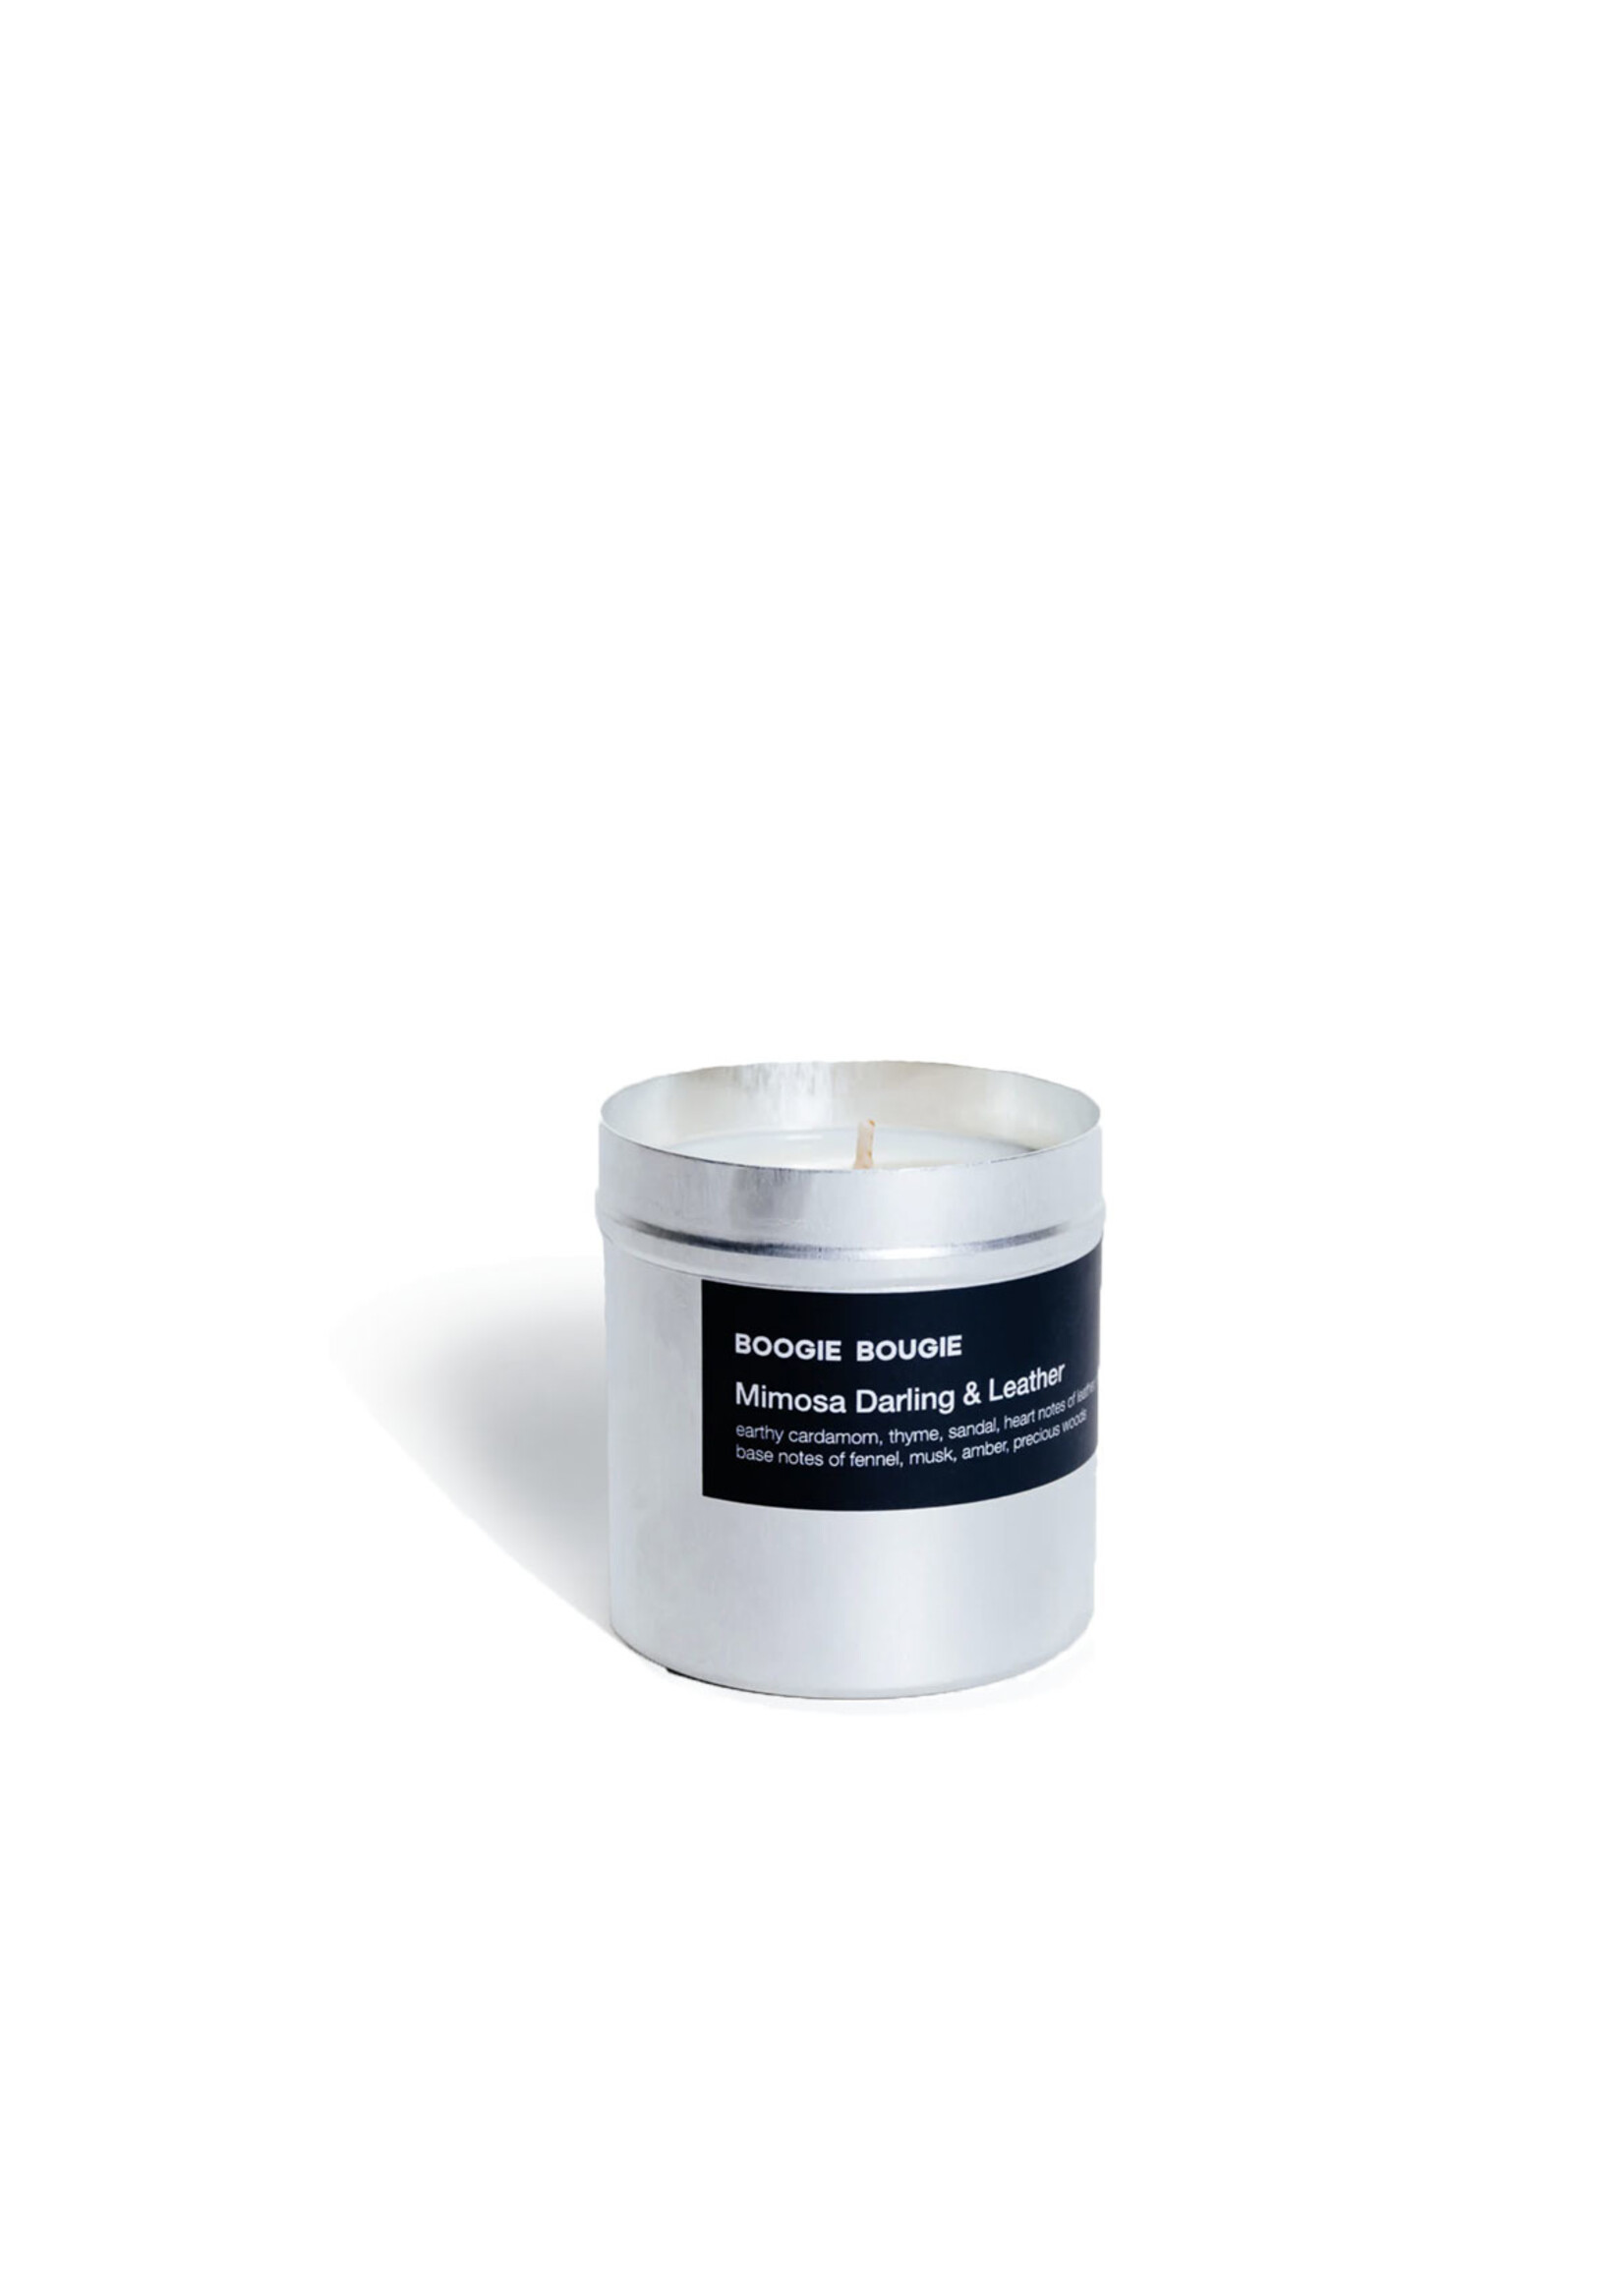 Boogie Bougie Scented Candle - Mimosa Darling & Leather